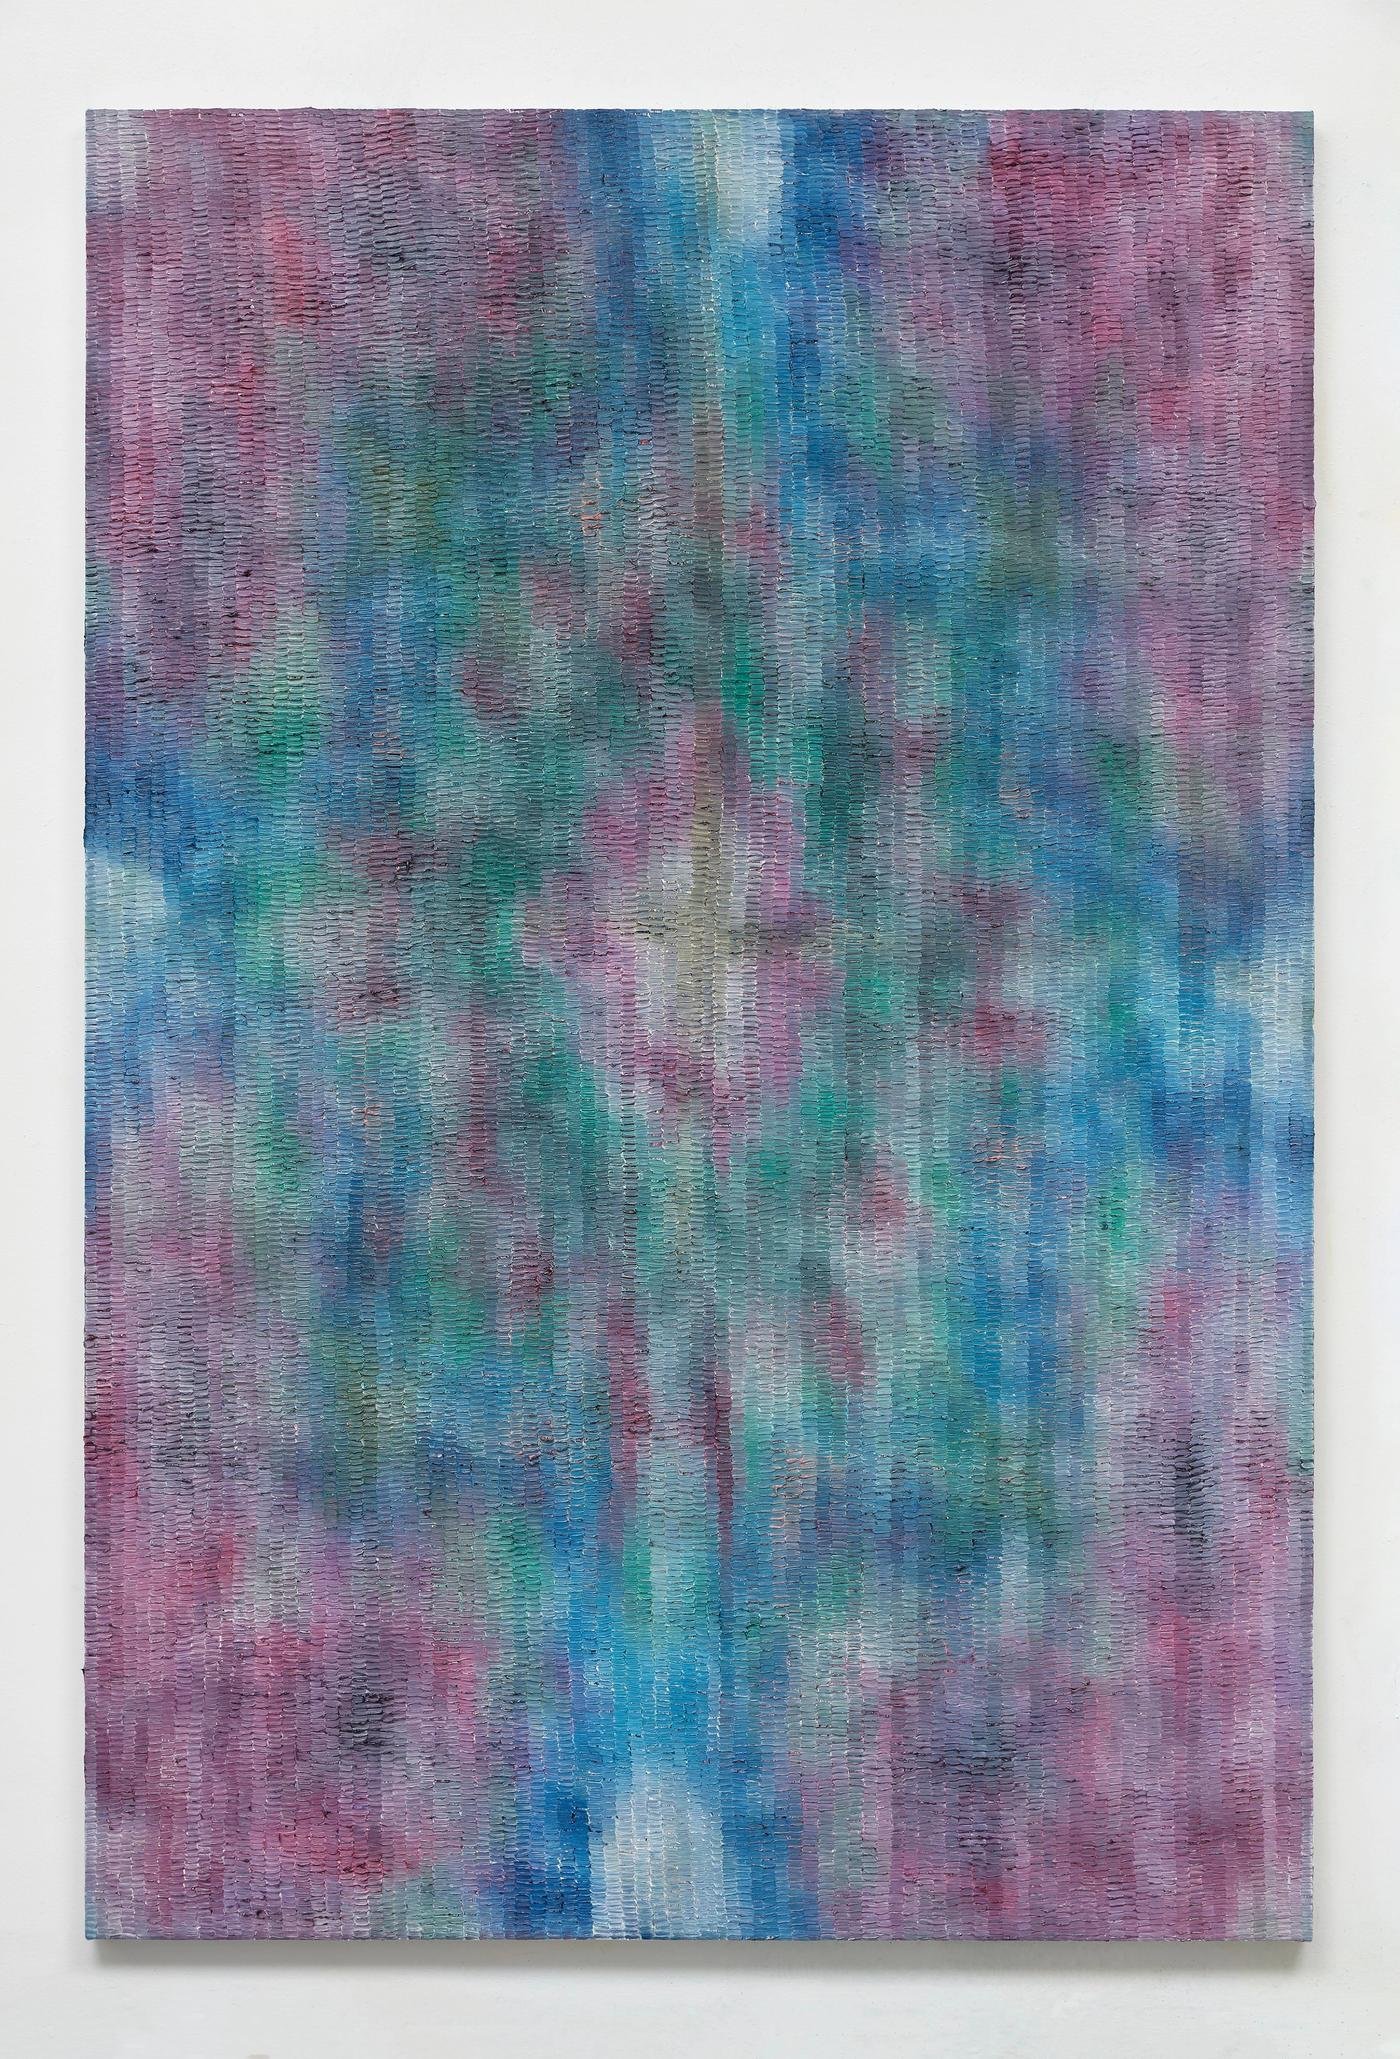    LF25.1 , 2022 Oil on canvas 72 × 48 in / 182.9 × 121.9 cm  